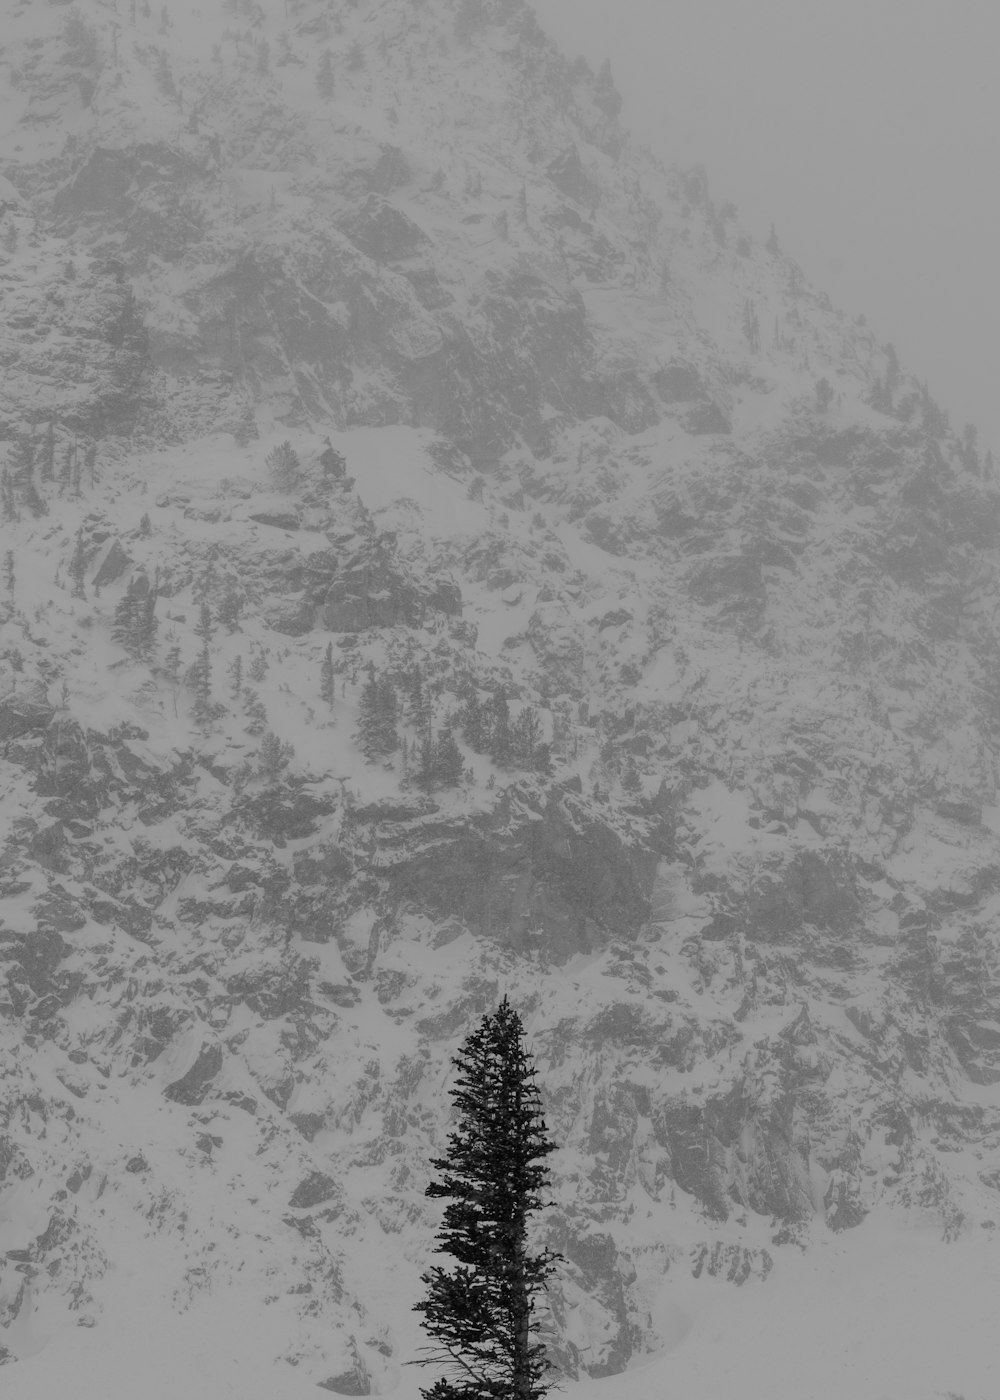 a lone pine tree in front of a snowy mountain